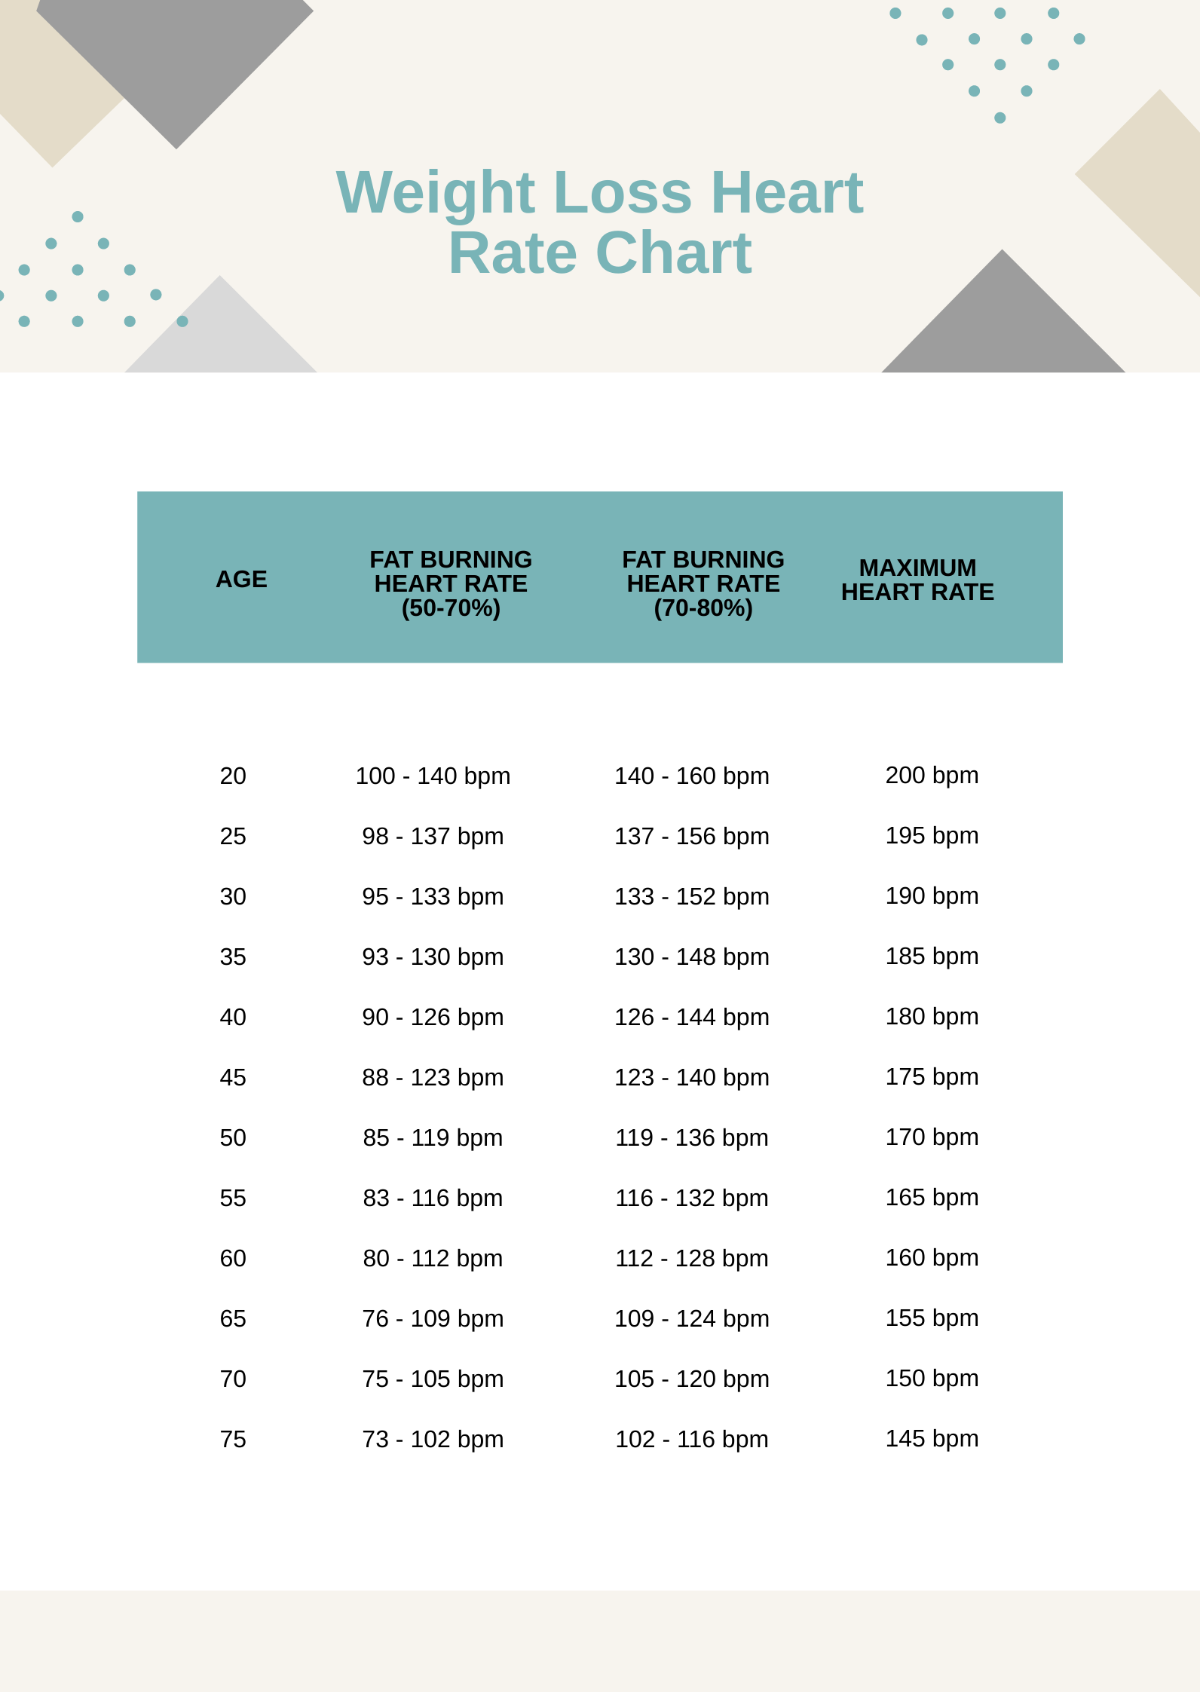 Weight Loss Heart Rate Chart Template